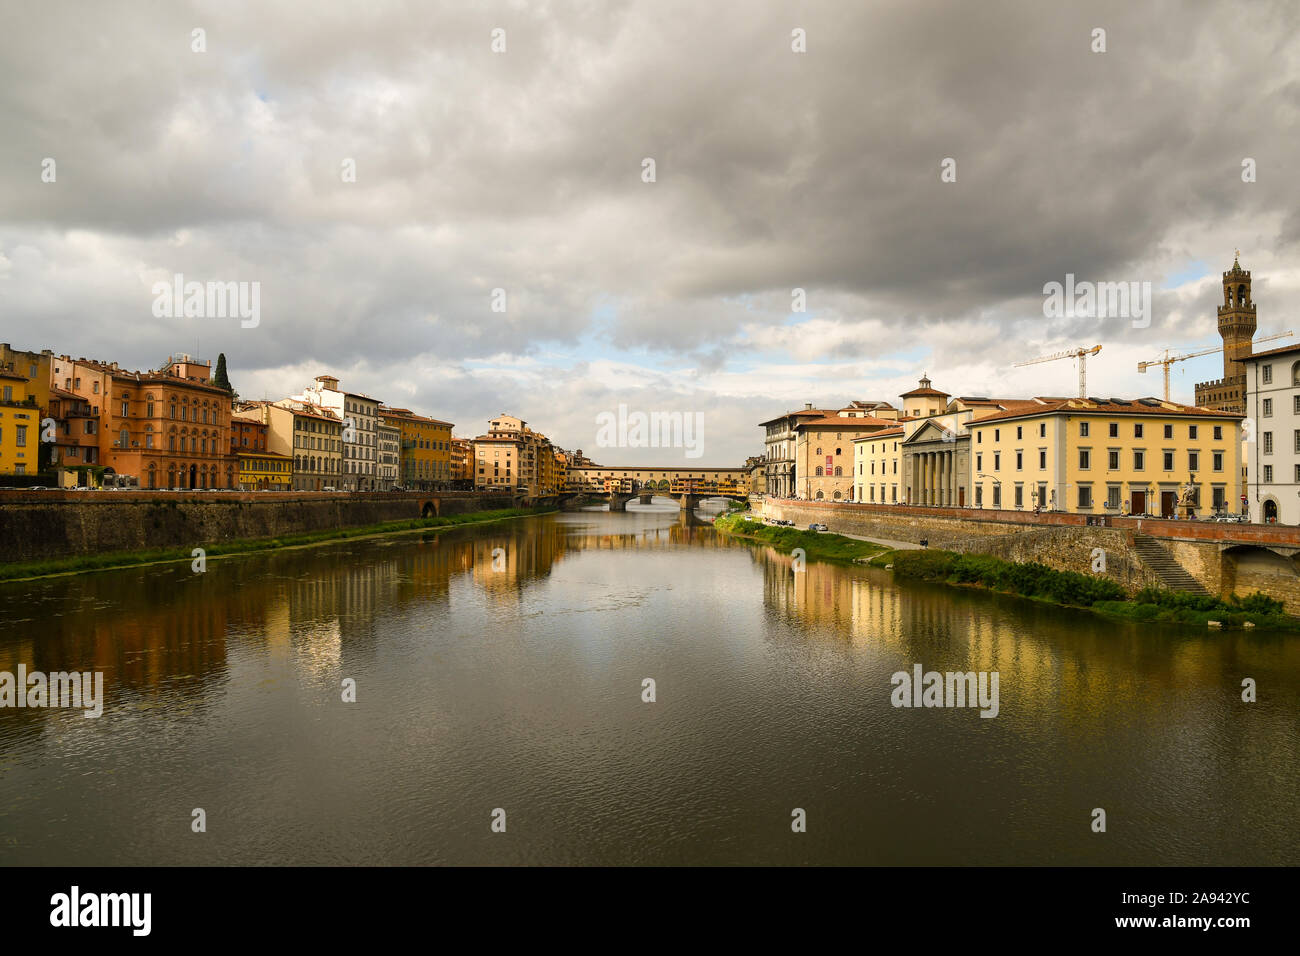 Scenic view of Lungarni with the famous Ponte Vecchio medieval bridge and stormy sky in autumn, Unesco World Heritage Site, Florence, Tuscany, Italy Stock Photo